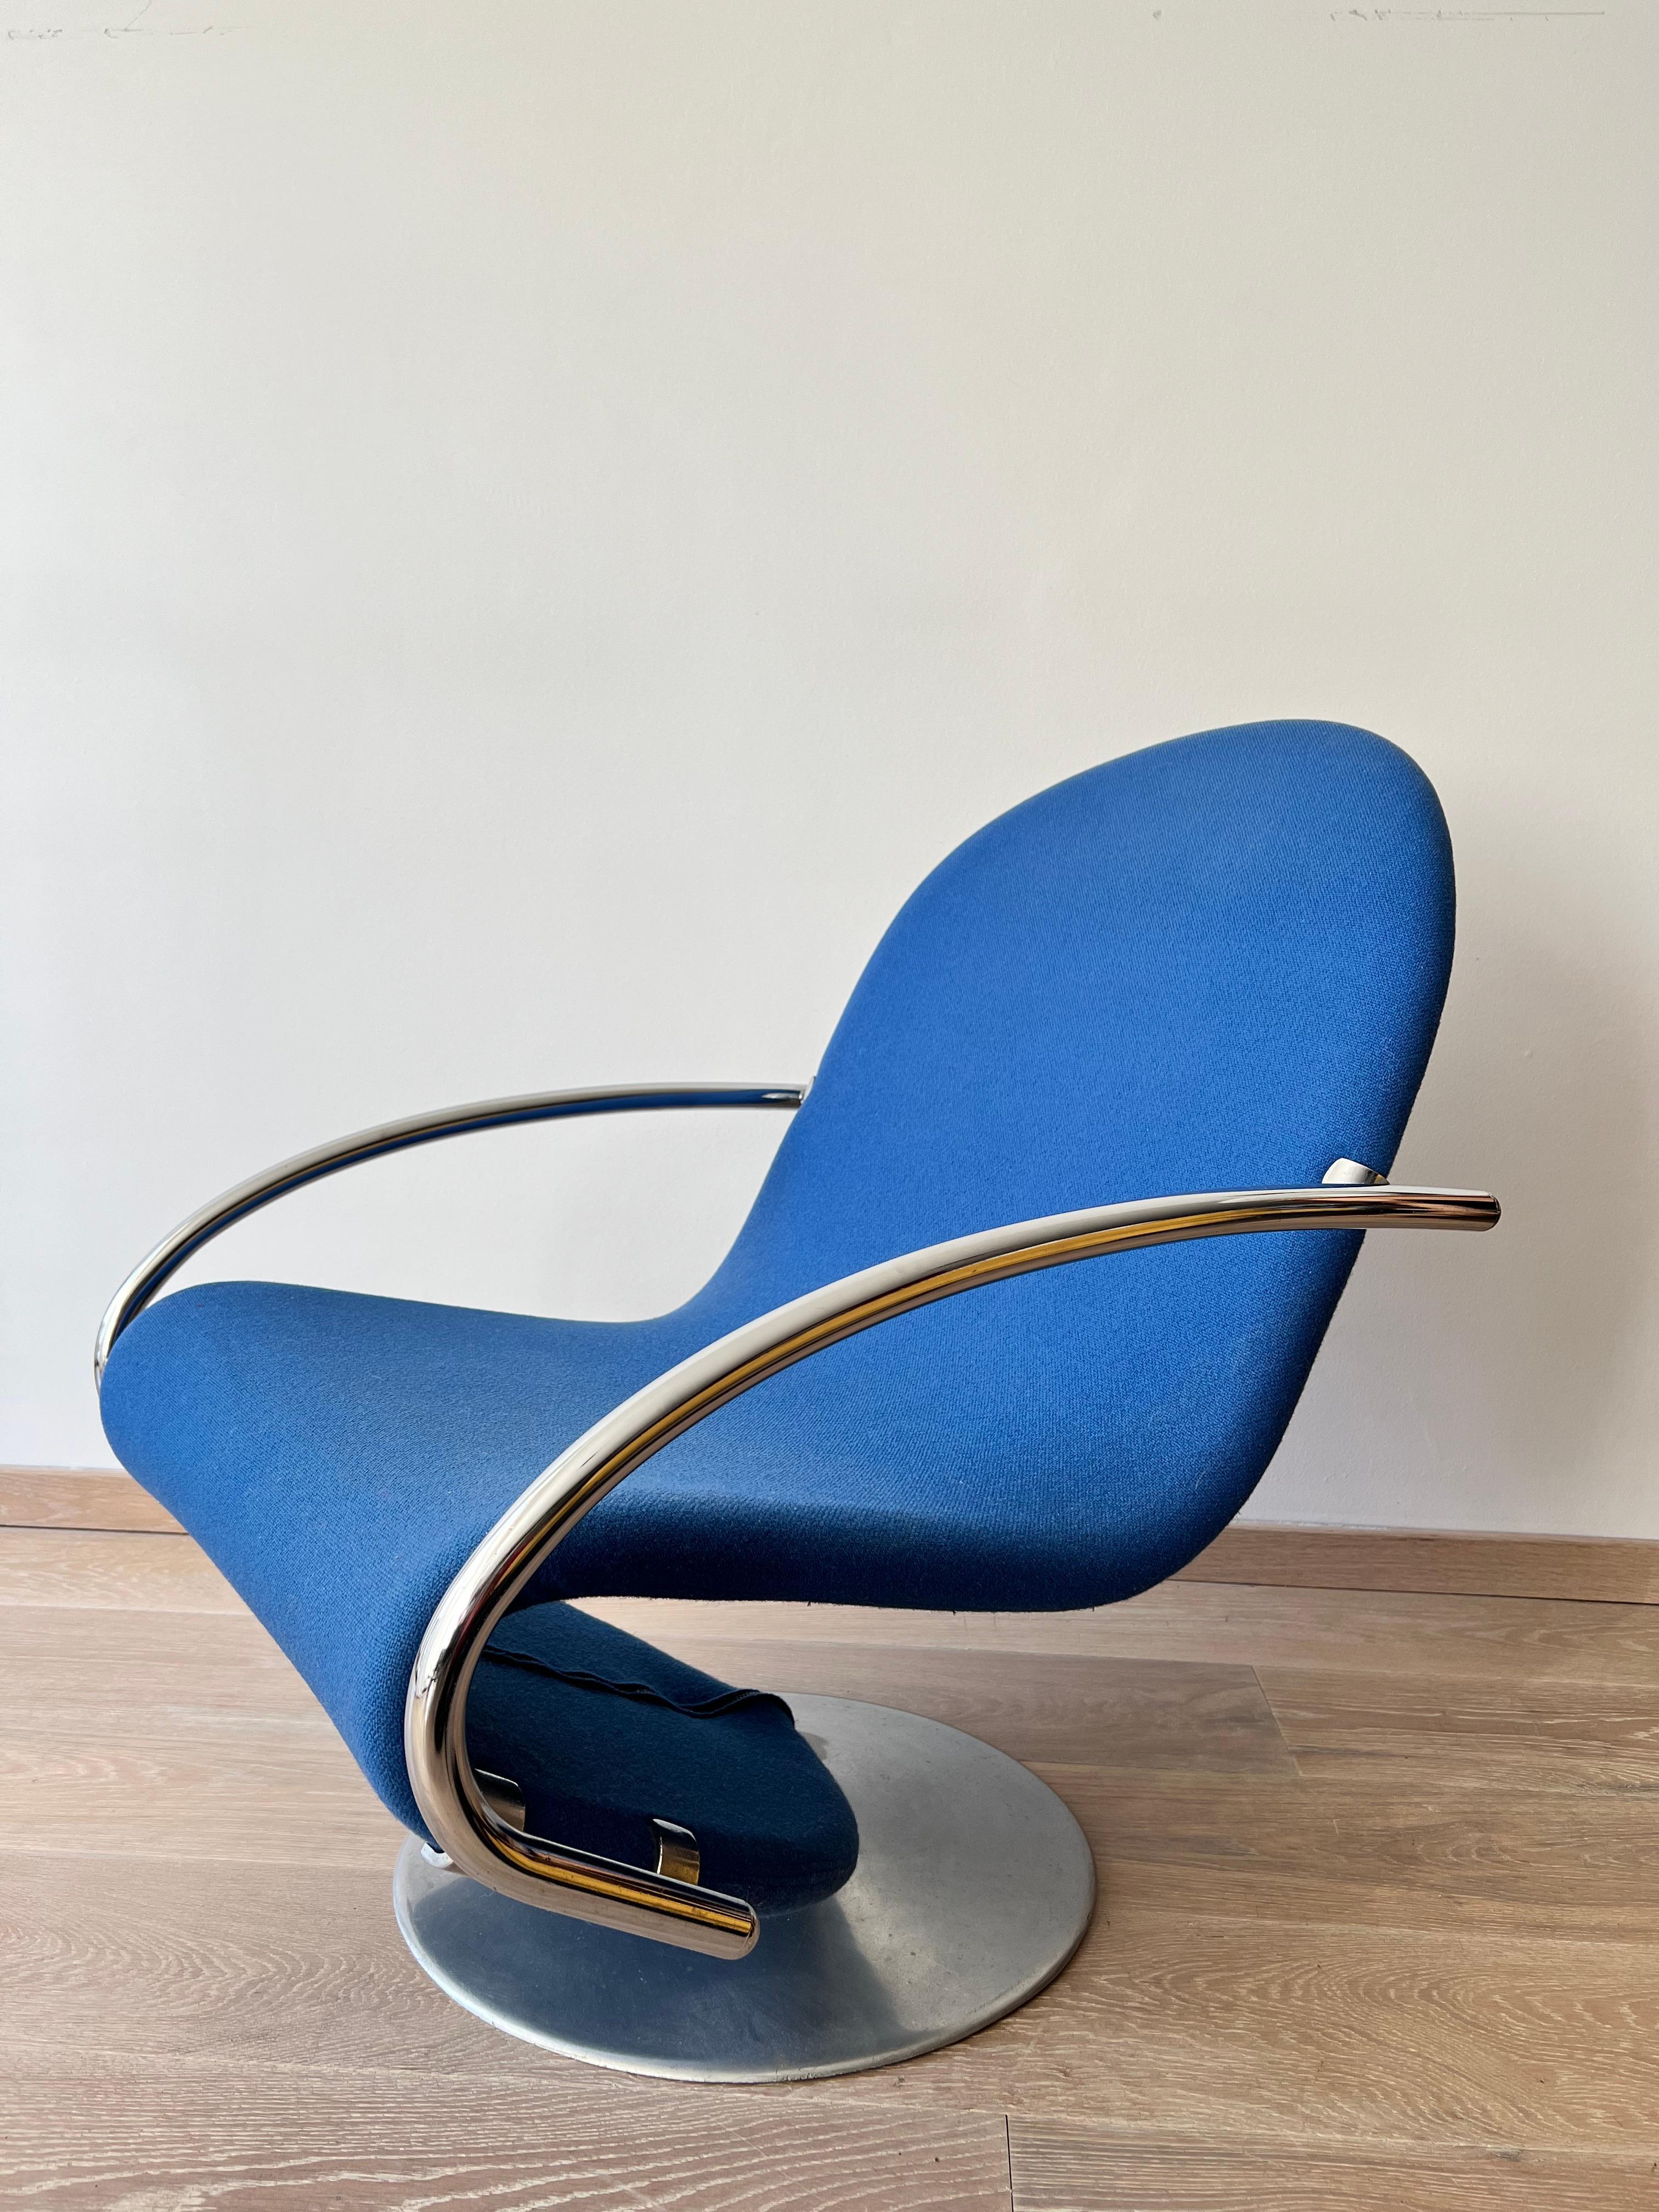 Early edition Verner Panton 123 System swivel chair.
Chromed base with original fabric.